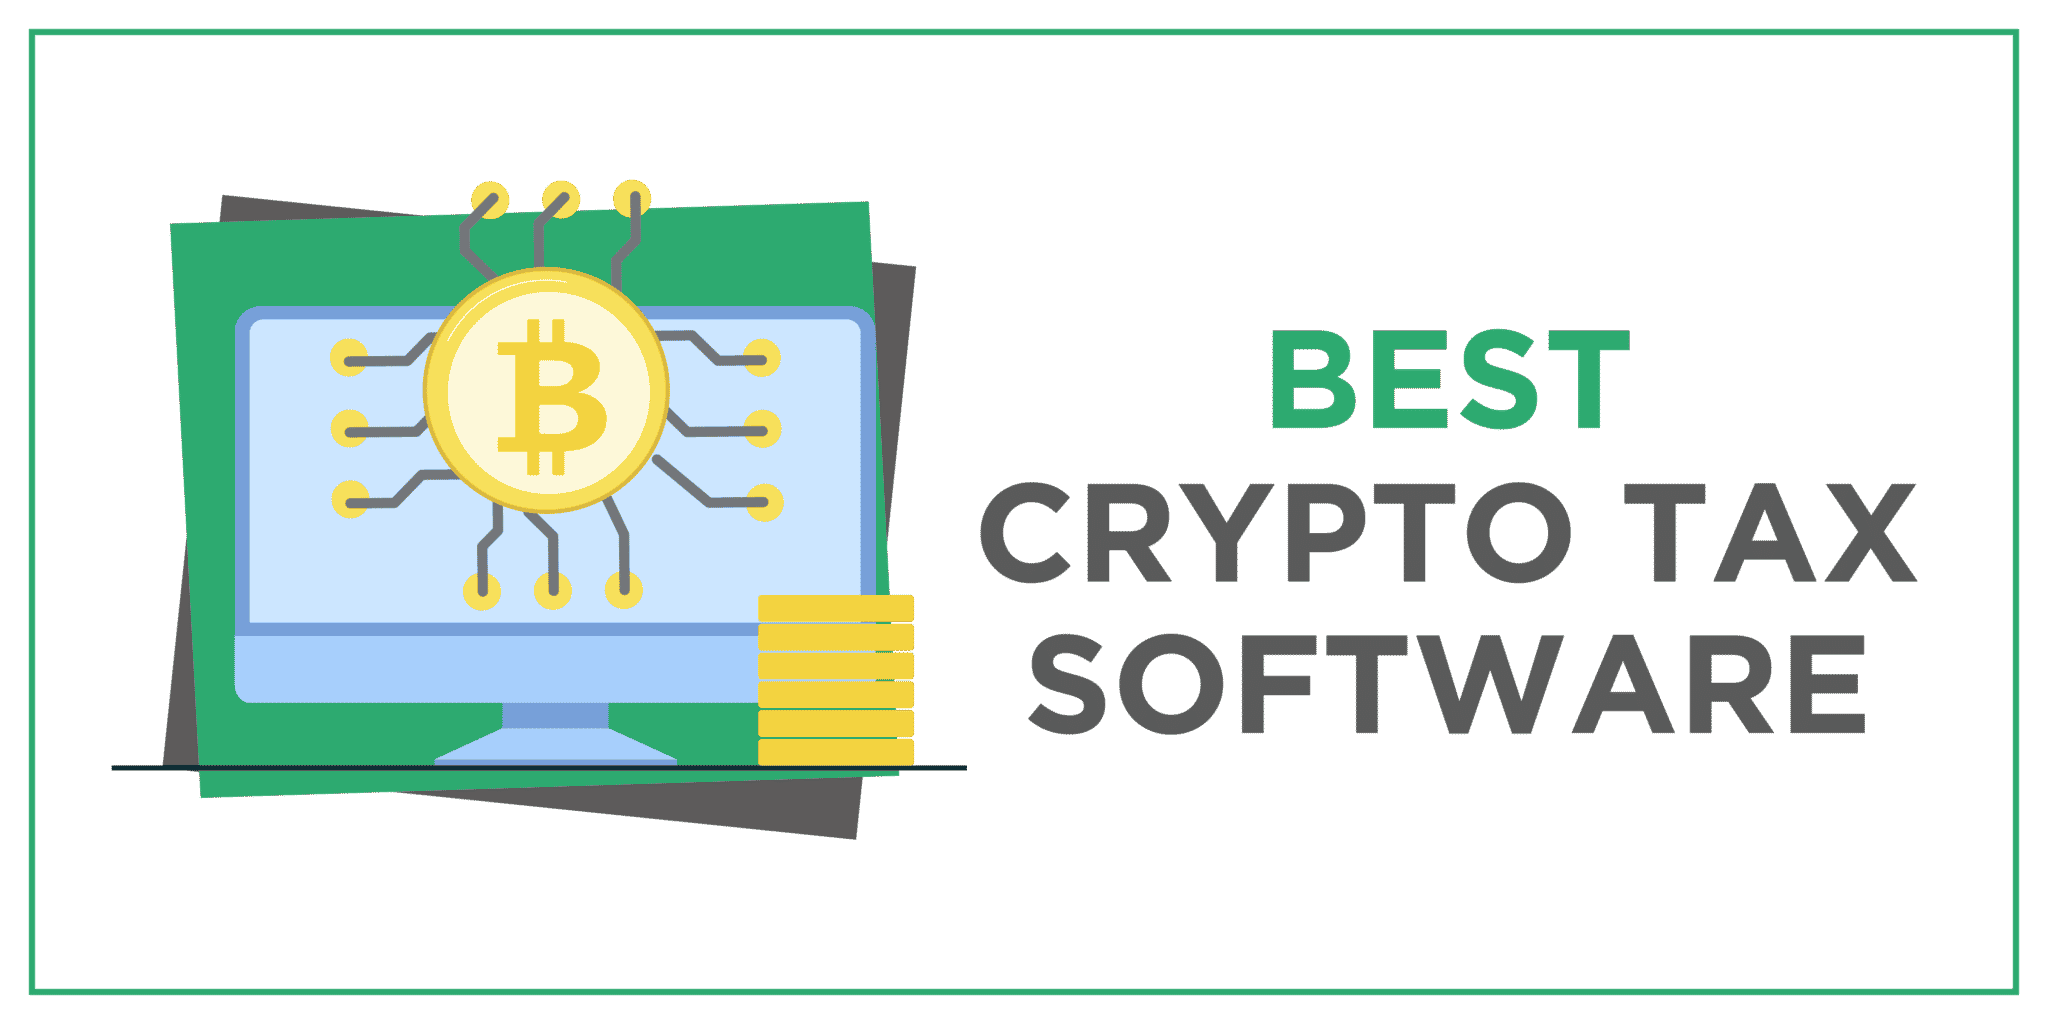 Best Crypto Tax Software